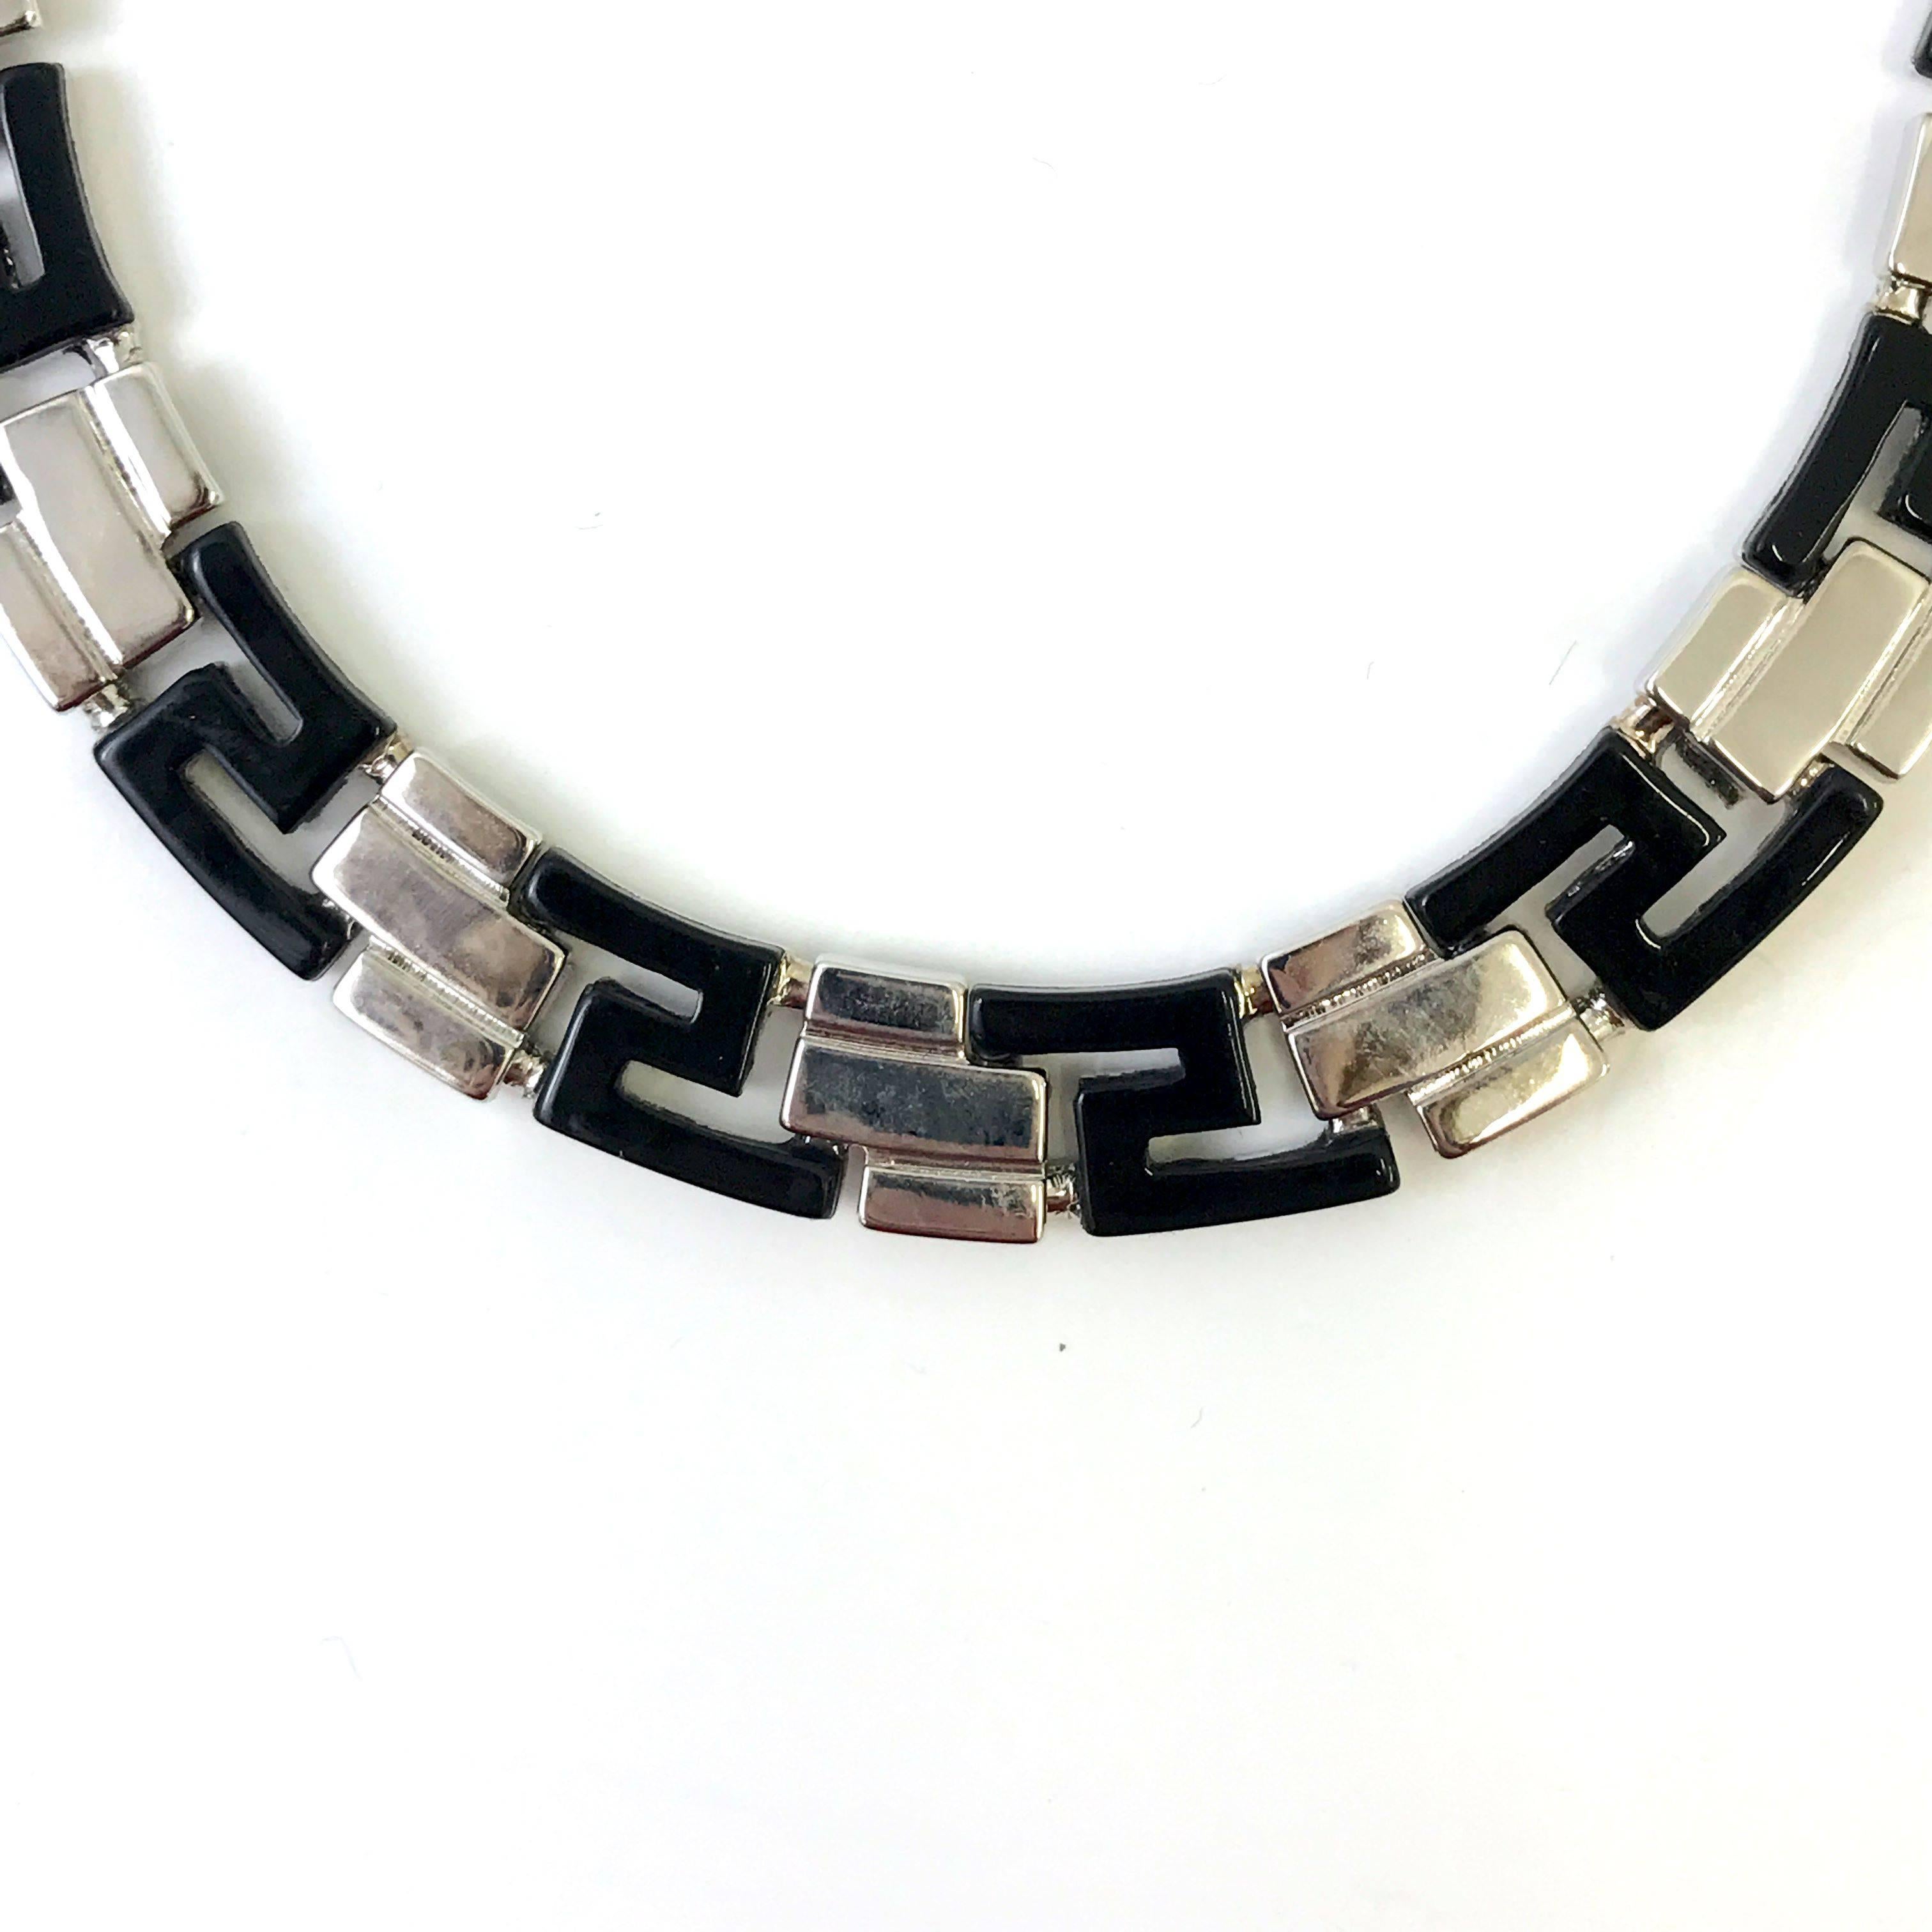 If you are looking for a understated Gianni Versace item to add or to start your collection then this vintage Gianni Versace necklace is just the piece. The necklace features an alternate black and silver greek pattern which was used a lot by the